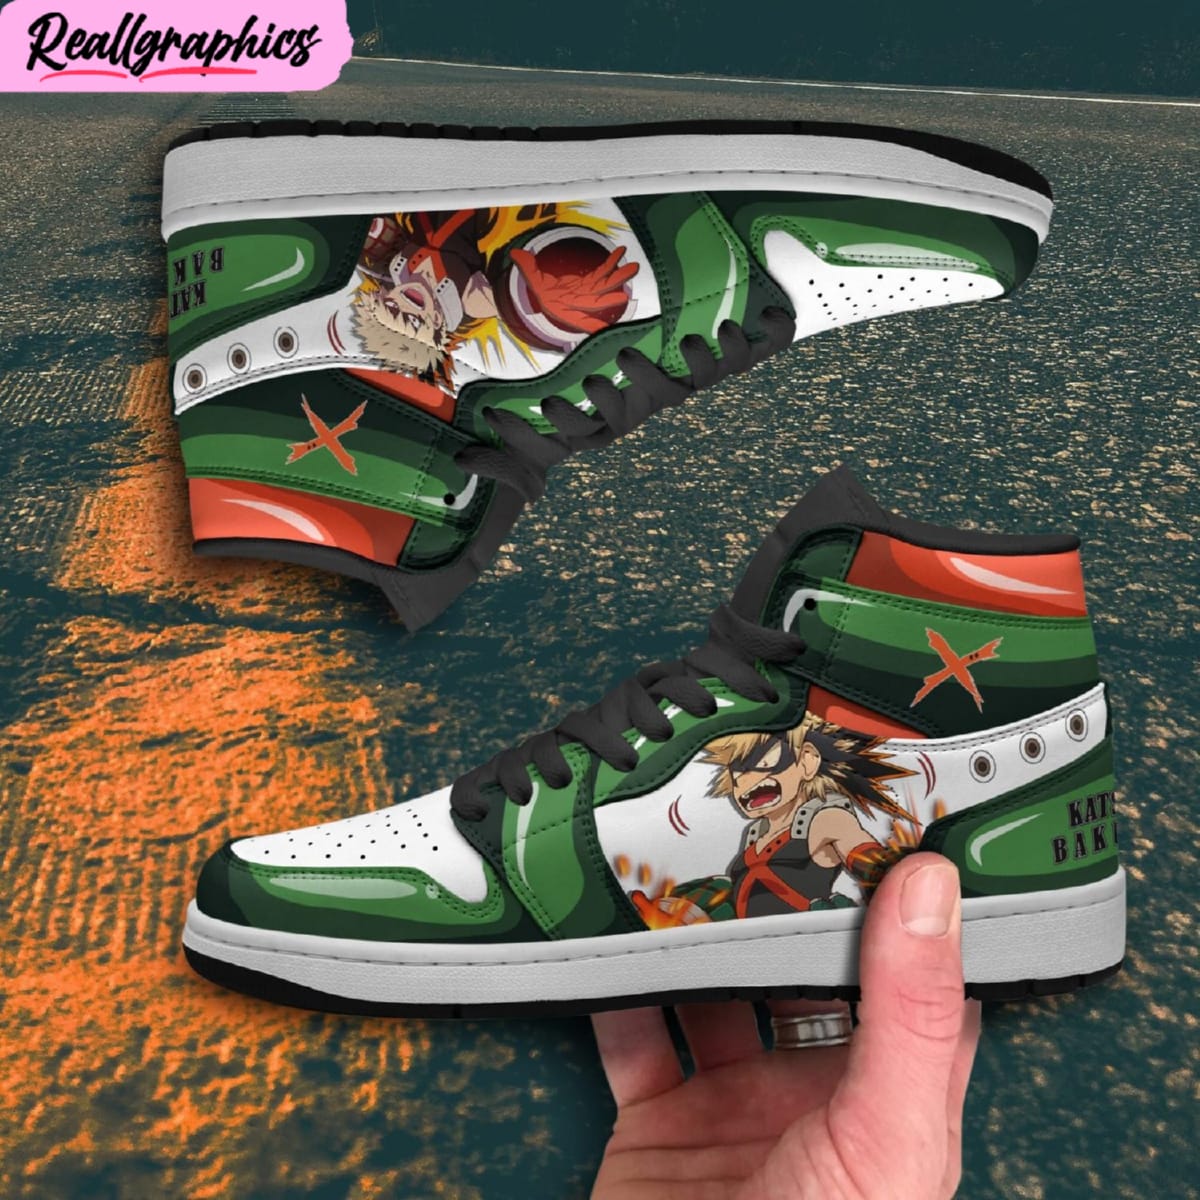 Bakugou Jordan 1 Sneaker Boots, Limited Edition My Here Academia Anime  Shoes - Reallgraphics